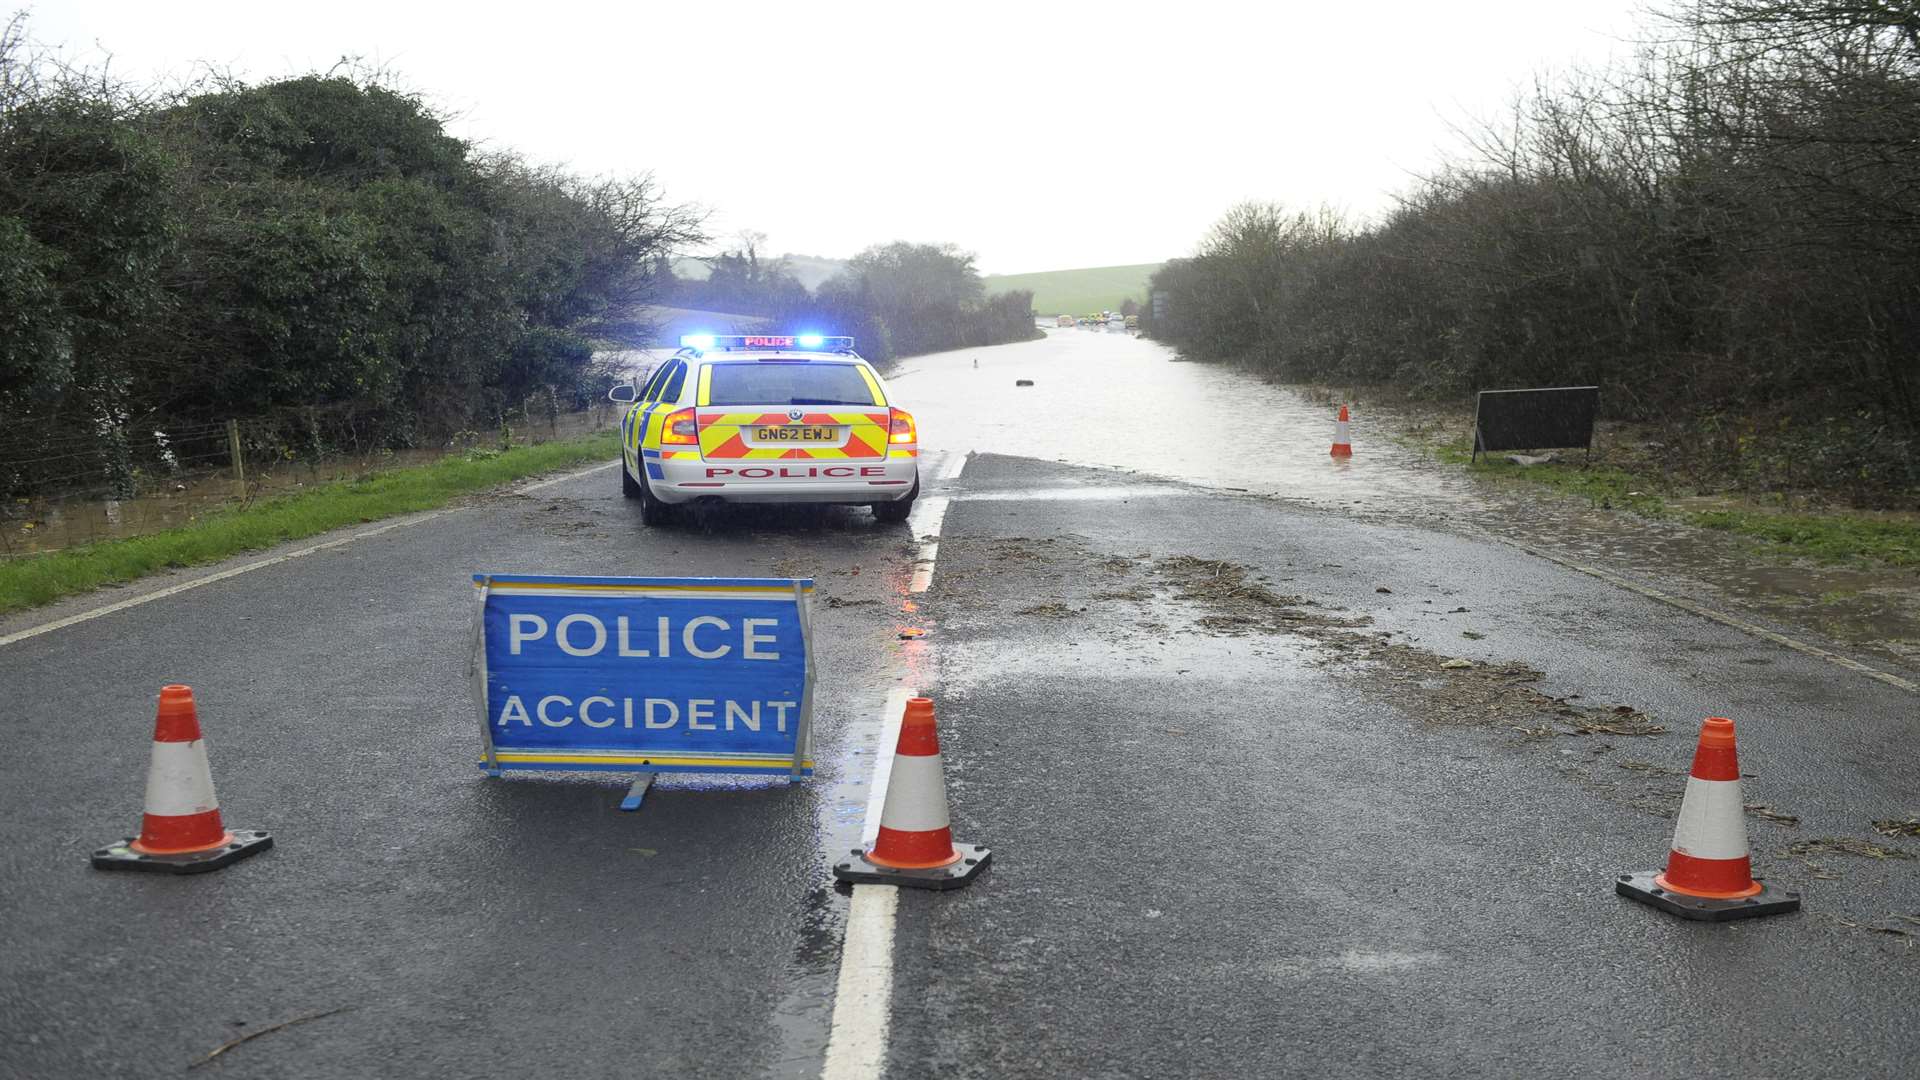 The police attended on Tuesday to help residents and drivers who were stuck in the Alkham Valley Road